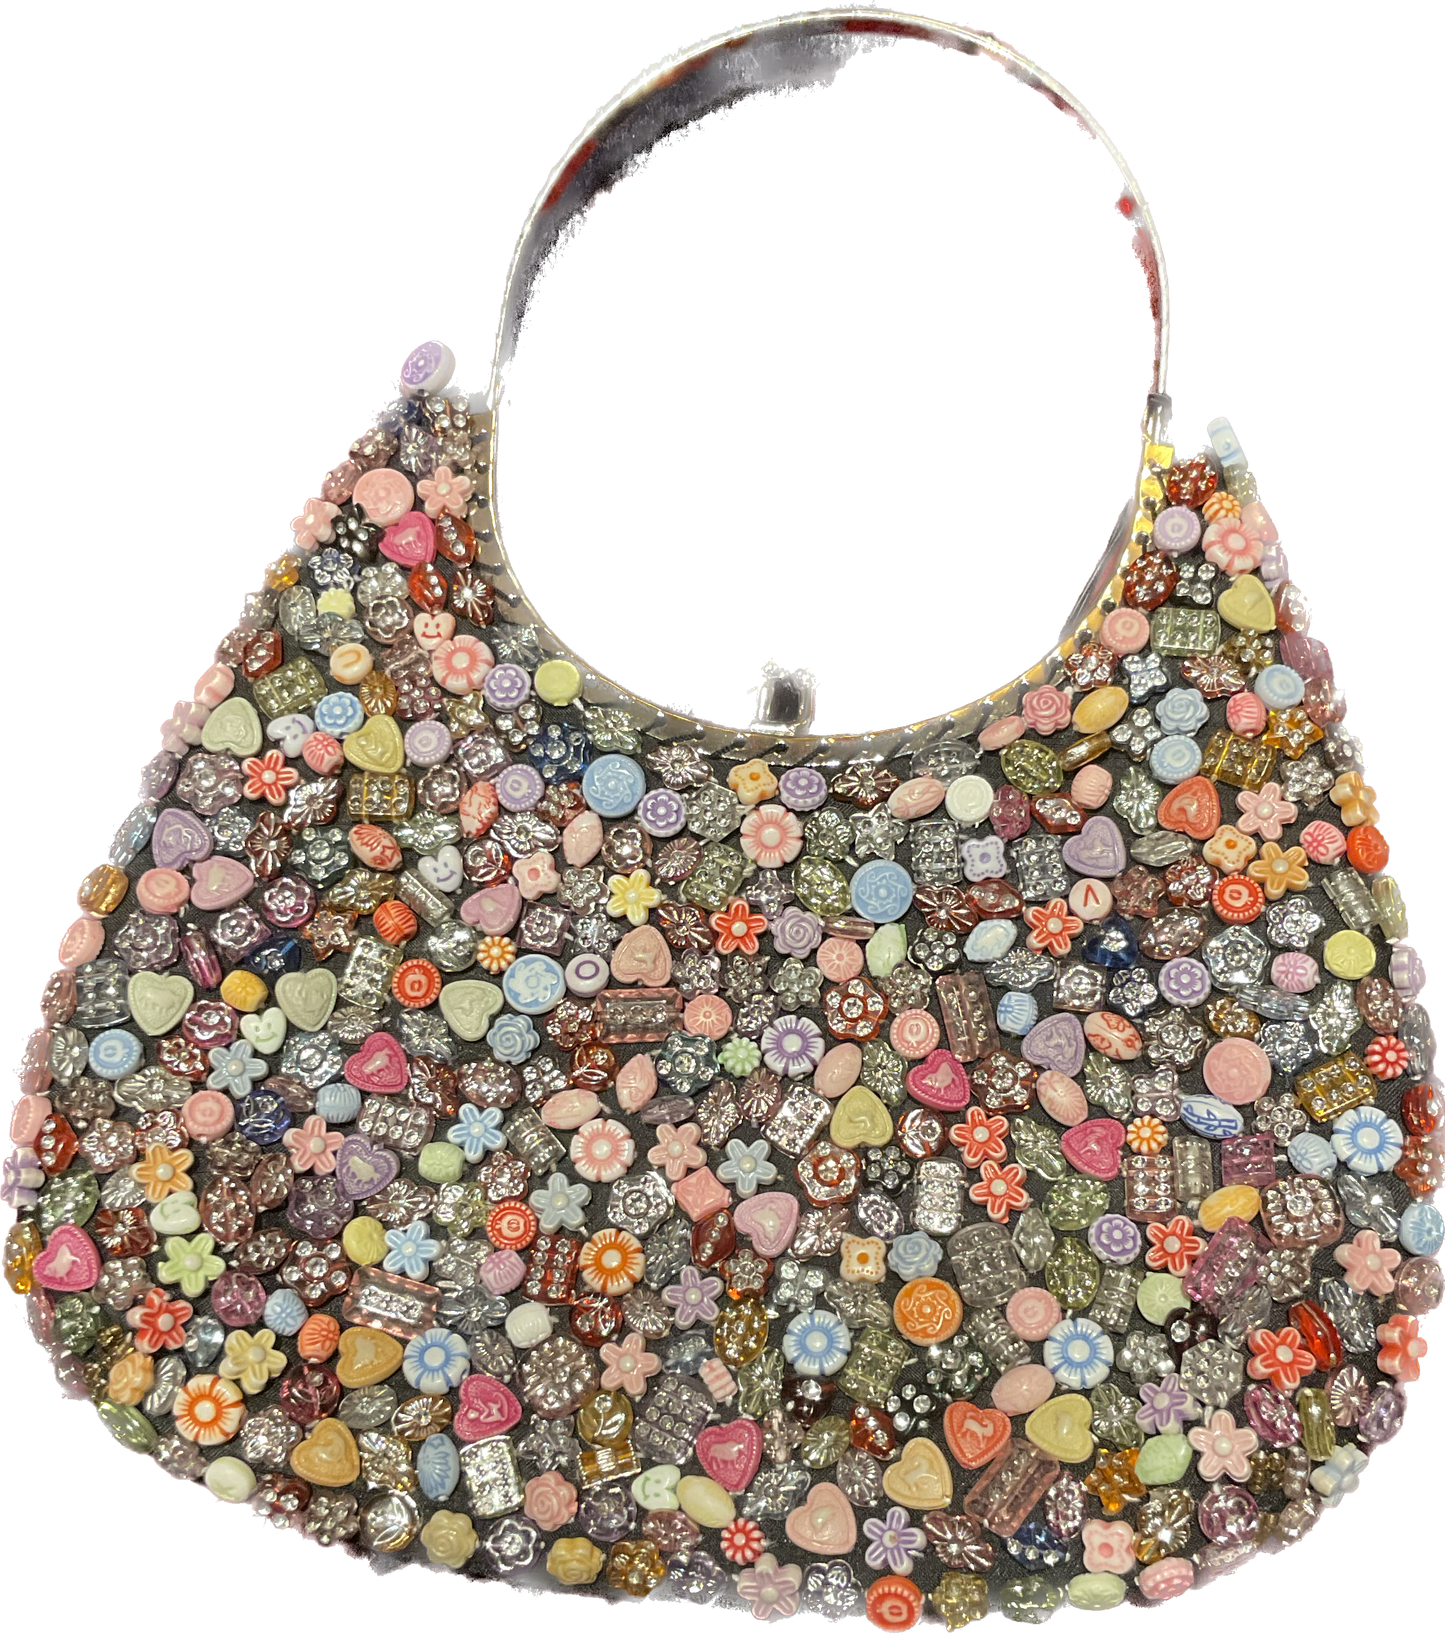 Colorful Beaded Bag with Silver Handle and Bling Buttons